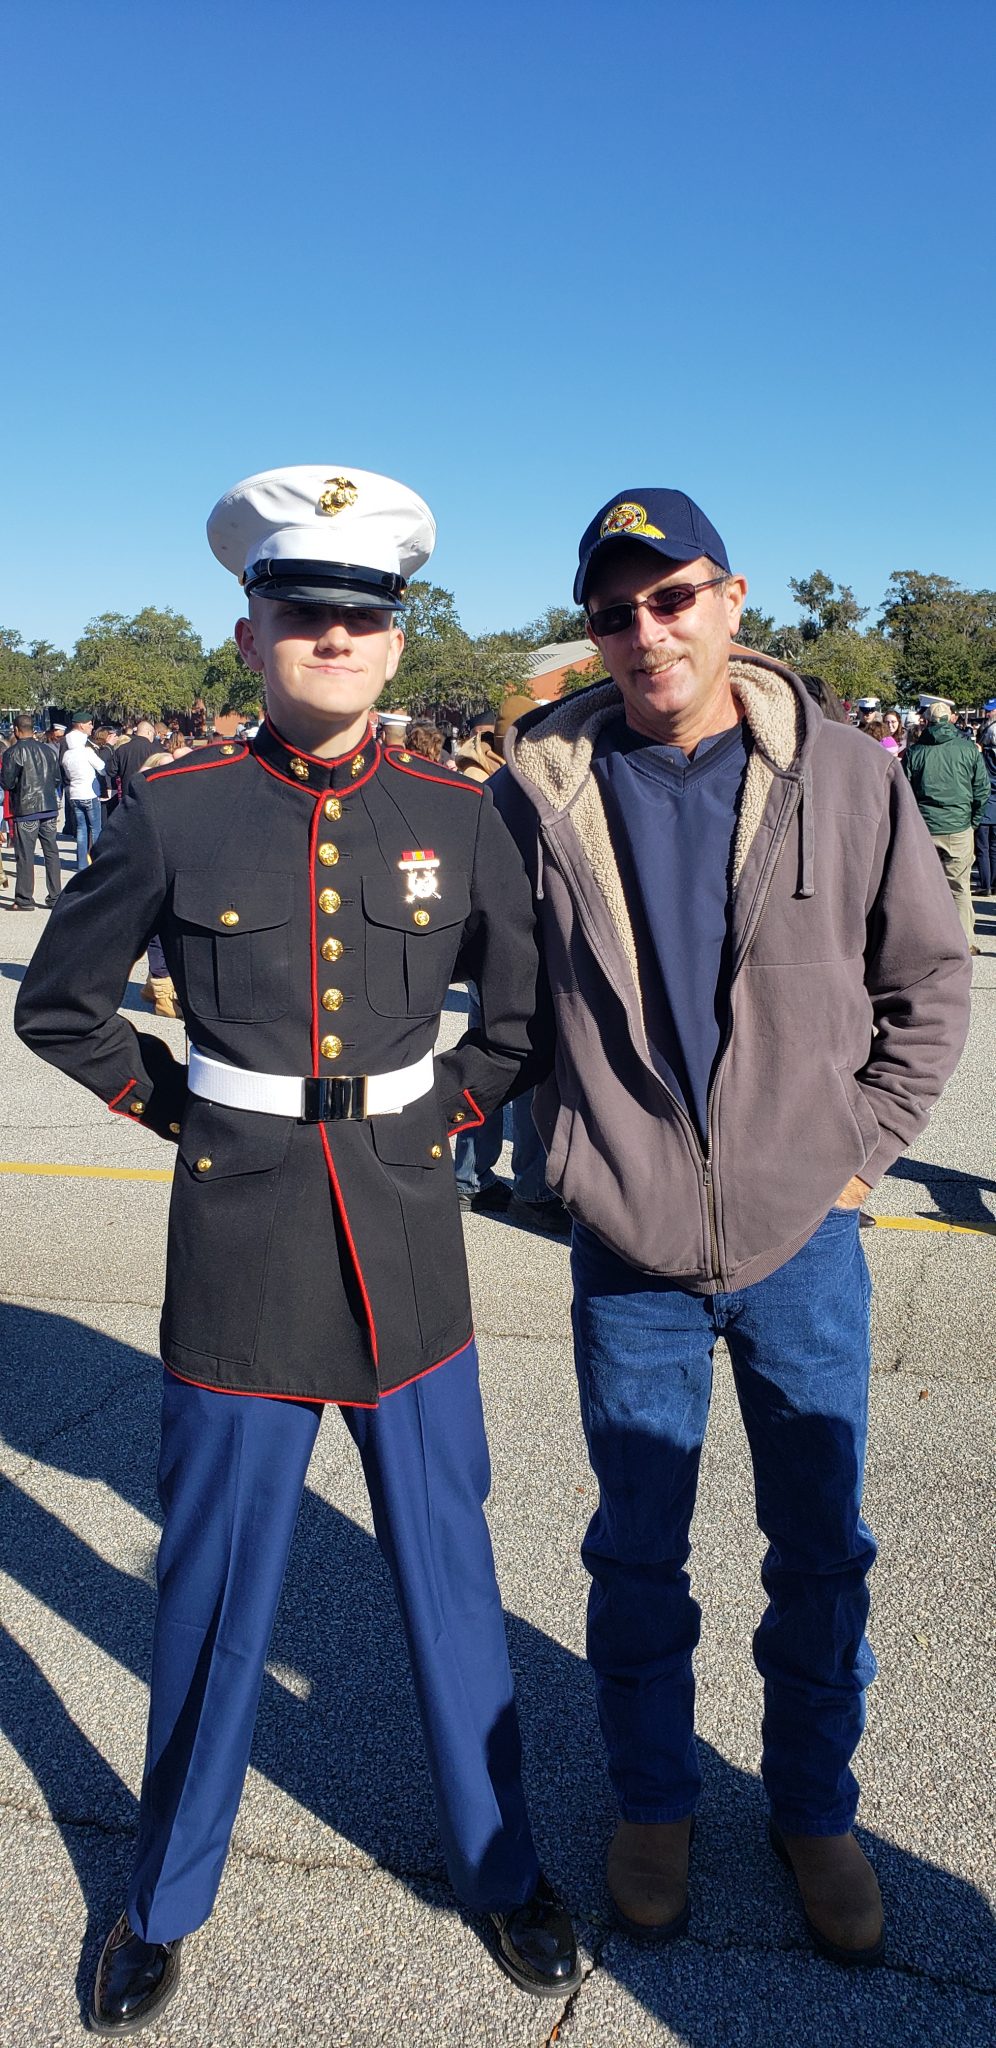 Our son graduated from Paris Island he had just become USMarine on Jan 25. 2019 His father and I were so proud of that kid ❤️